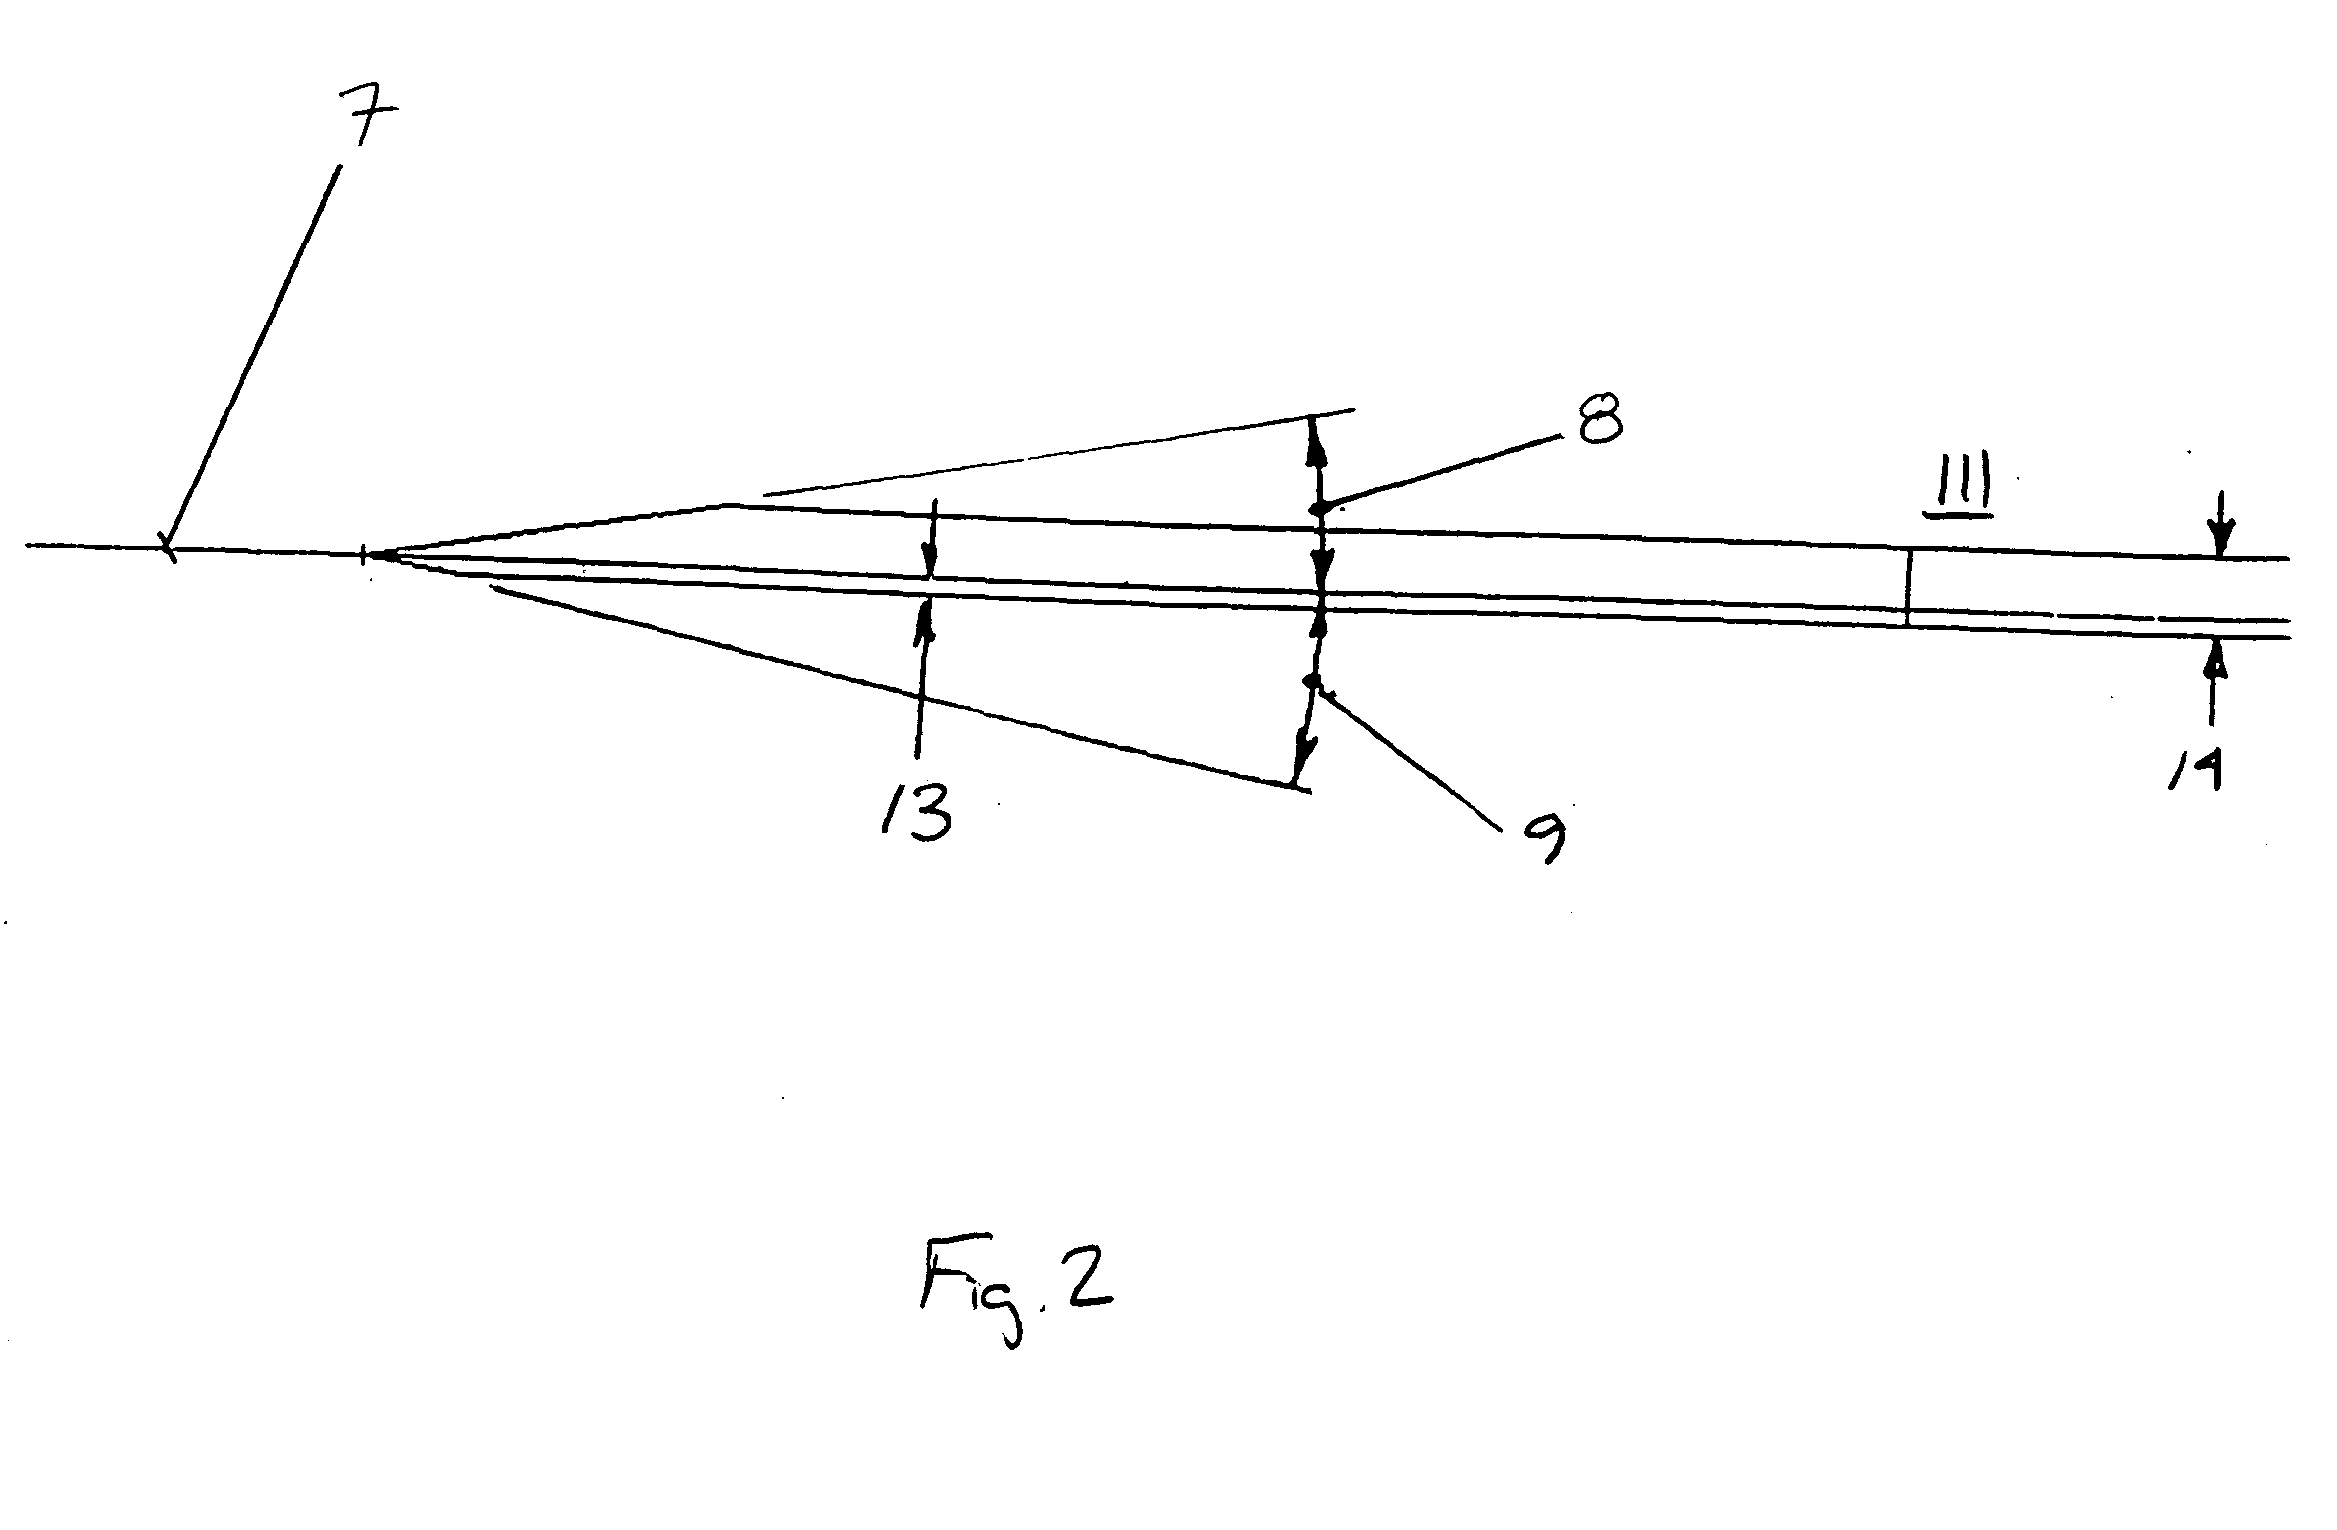 Non-separating diffuser for holes produced by a two step process